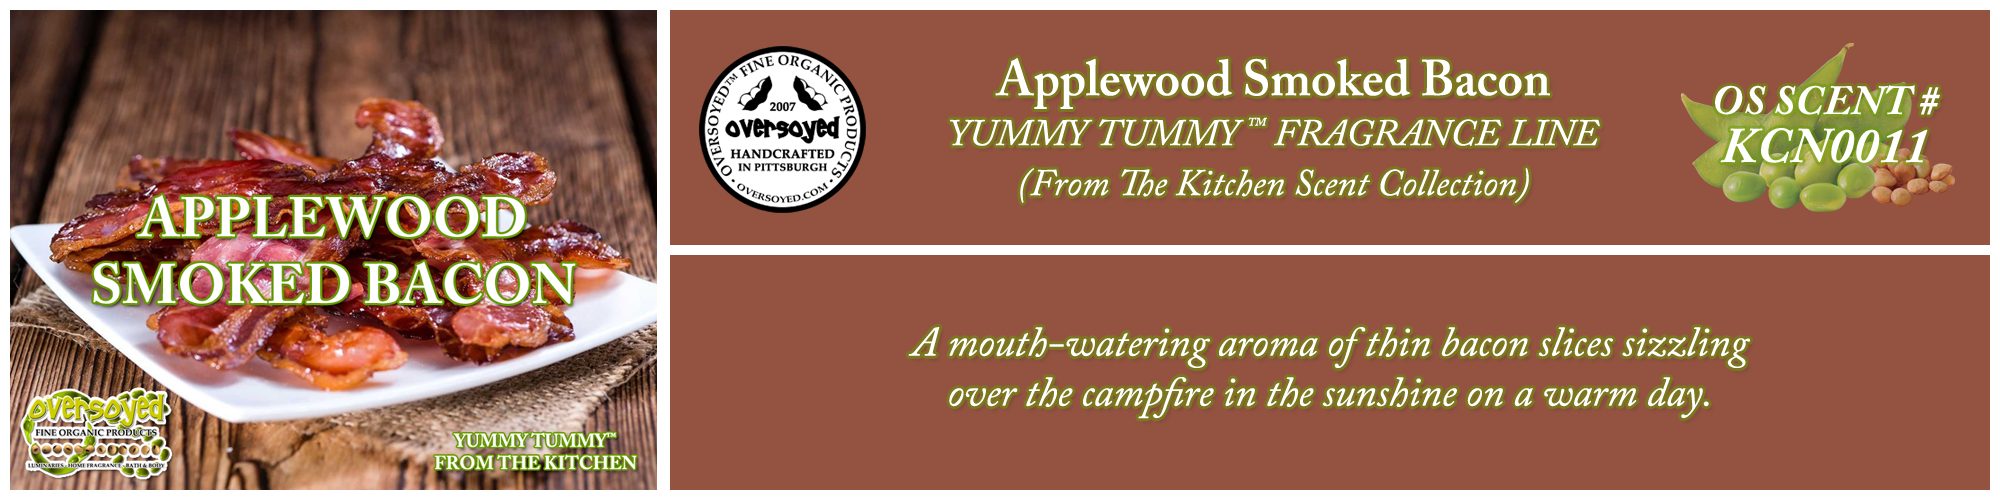 Applewood Smoked Bacon Handcrafted Products Collection